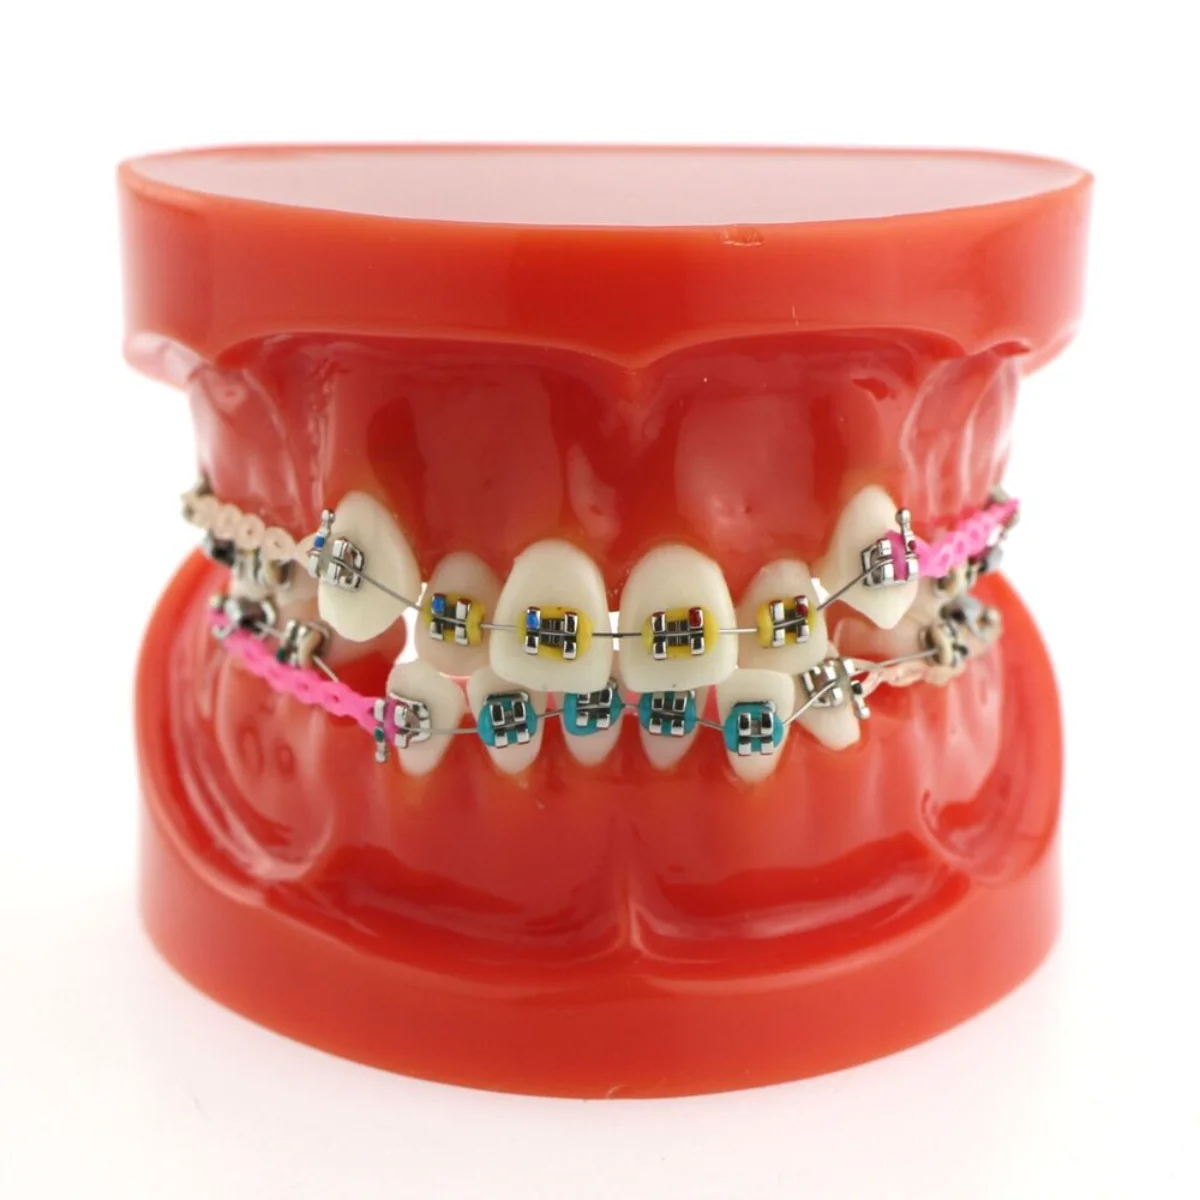 Dental Orthodontic Treatment Teeth Model Malocclusion Correction With Metal Brackets Teaching Model for Patient Demo